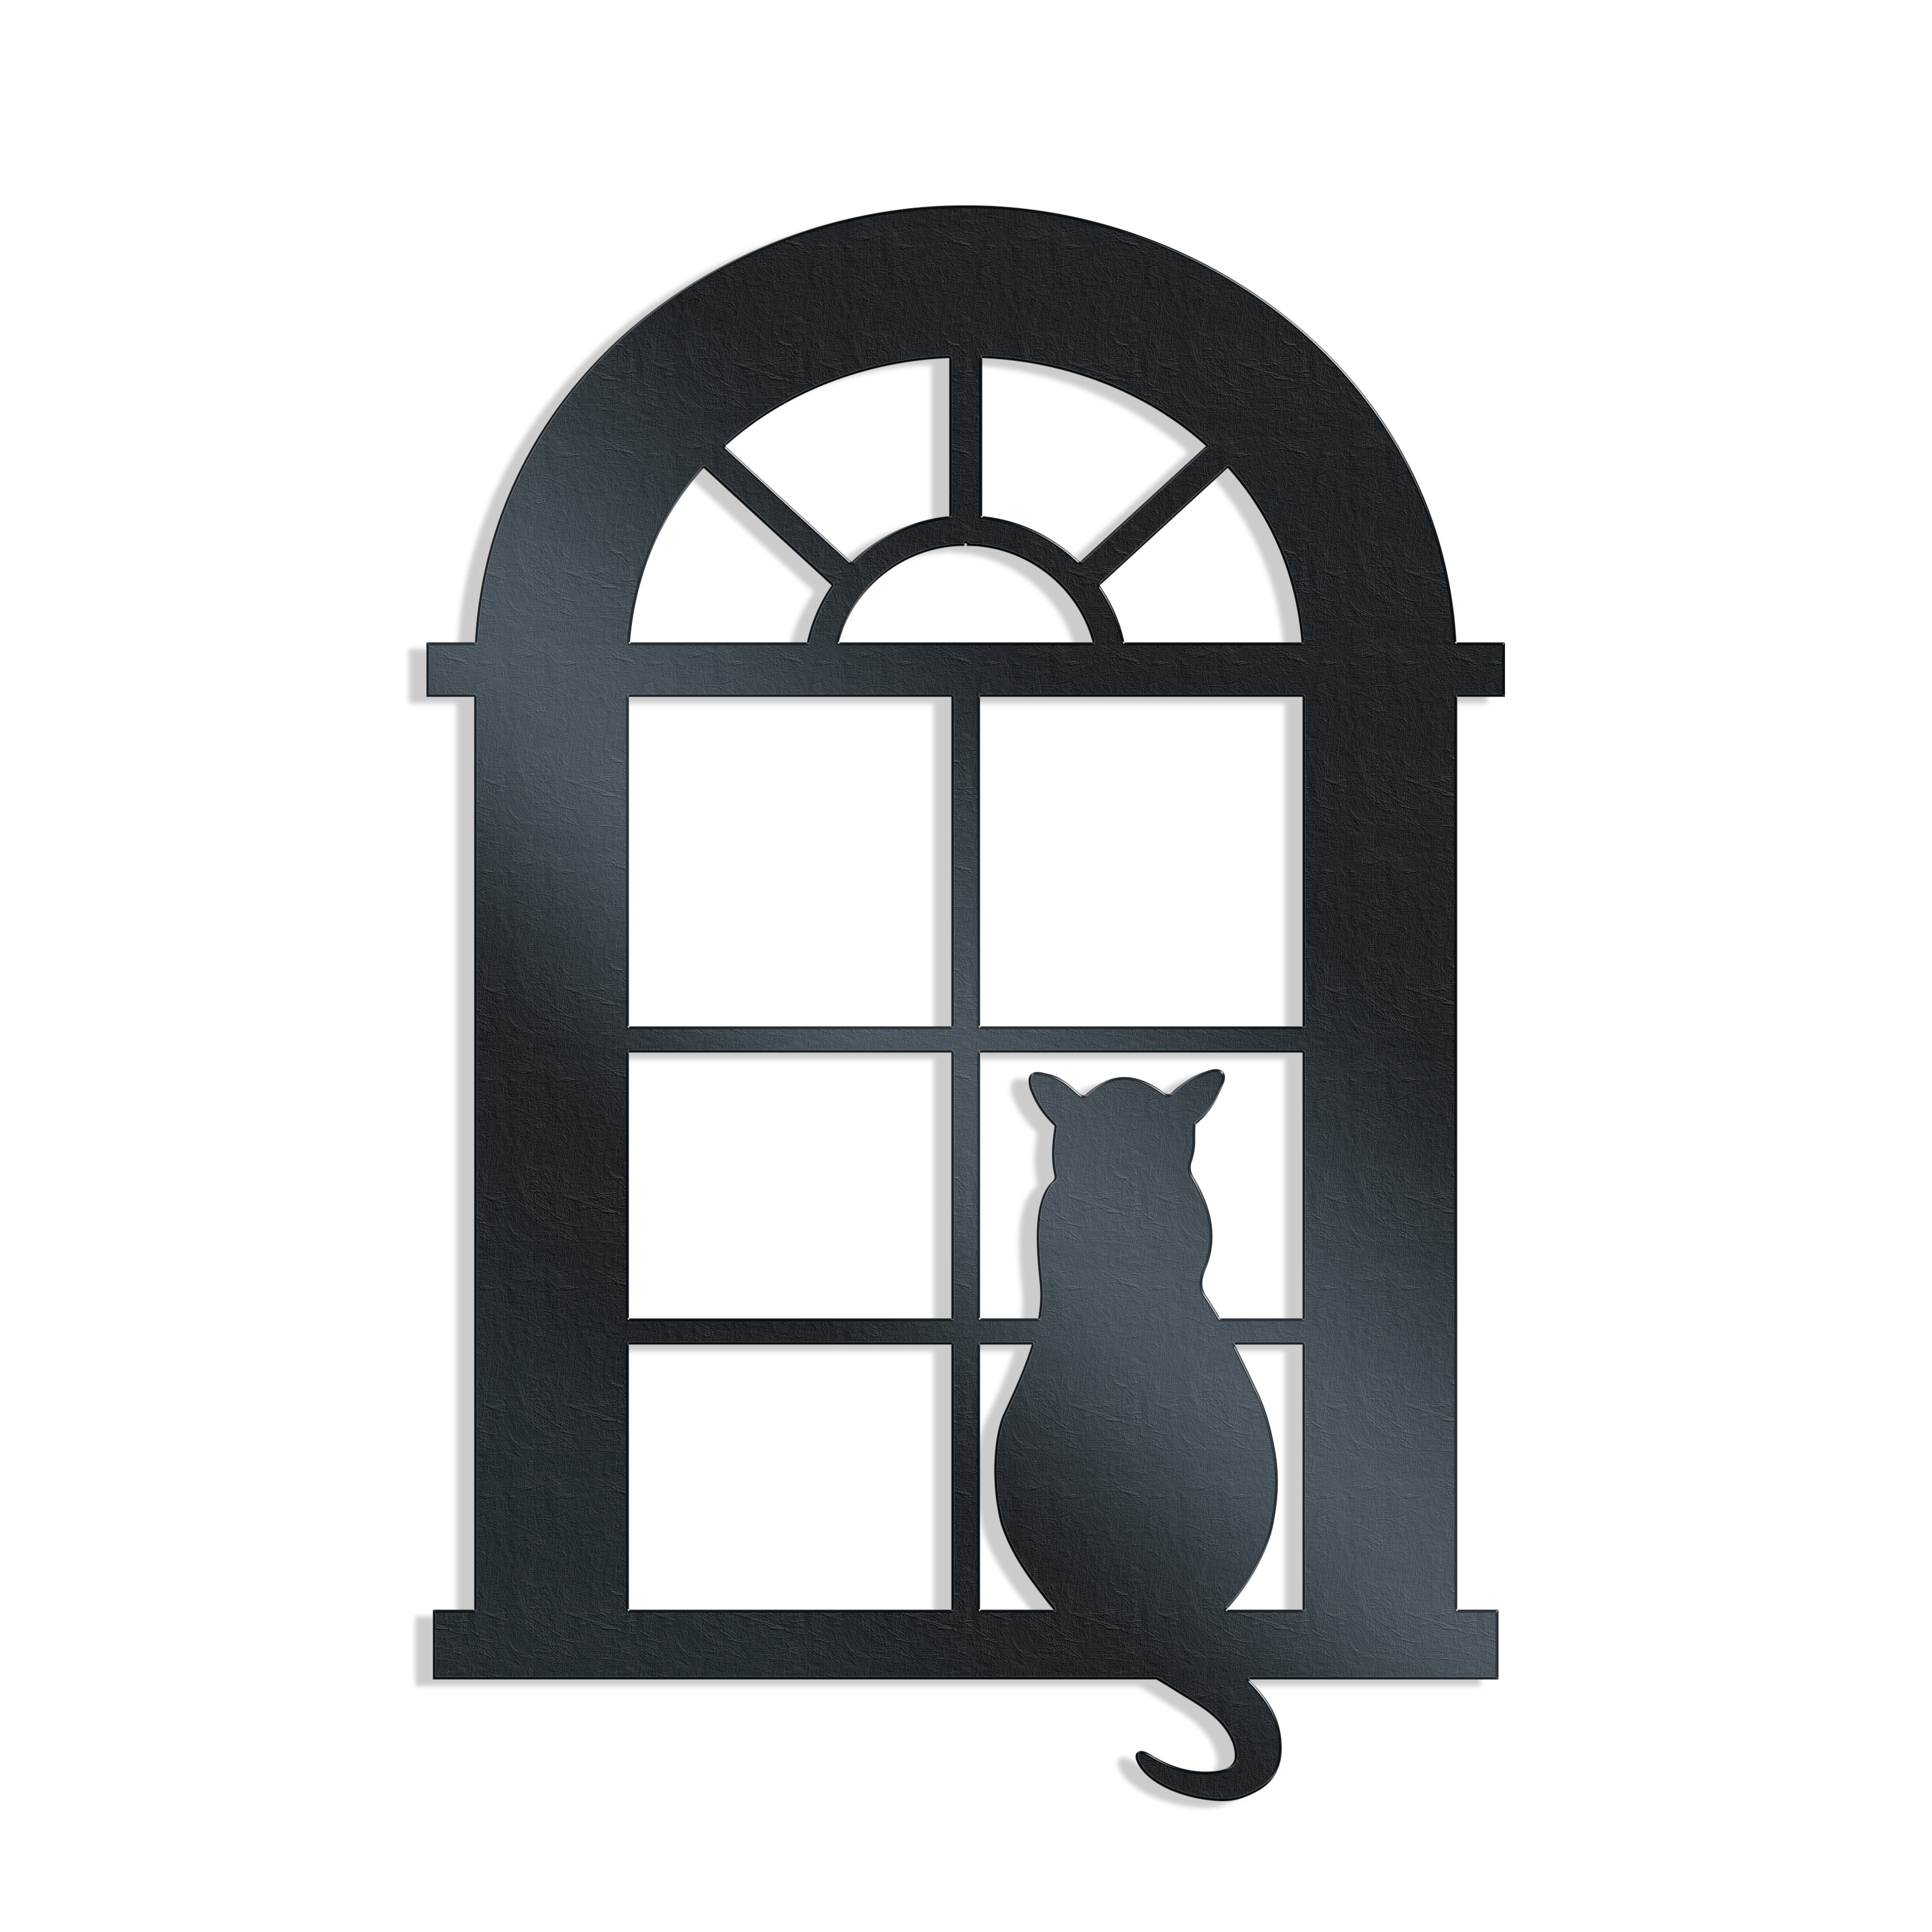 Metal wall decor showing a cat sitting and looking out of an arched window